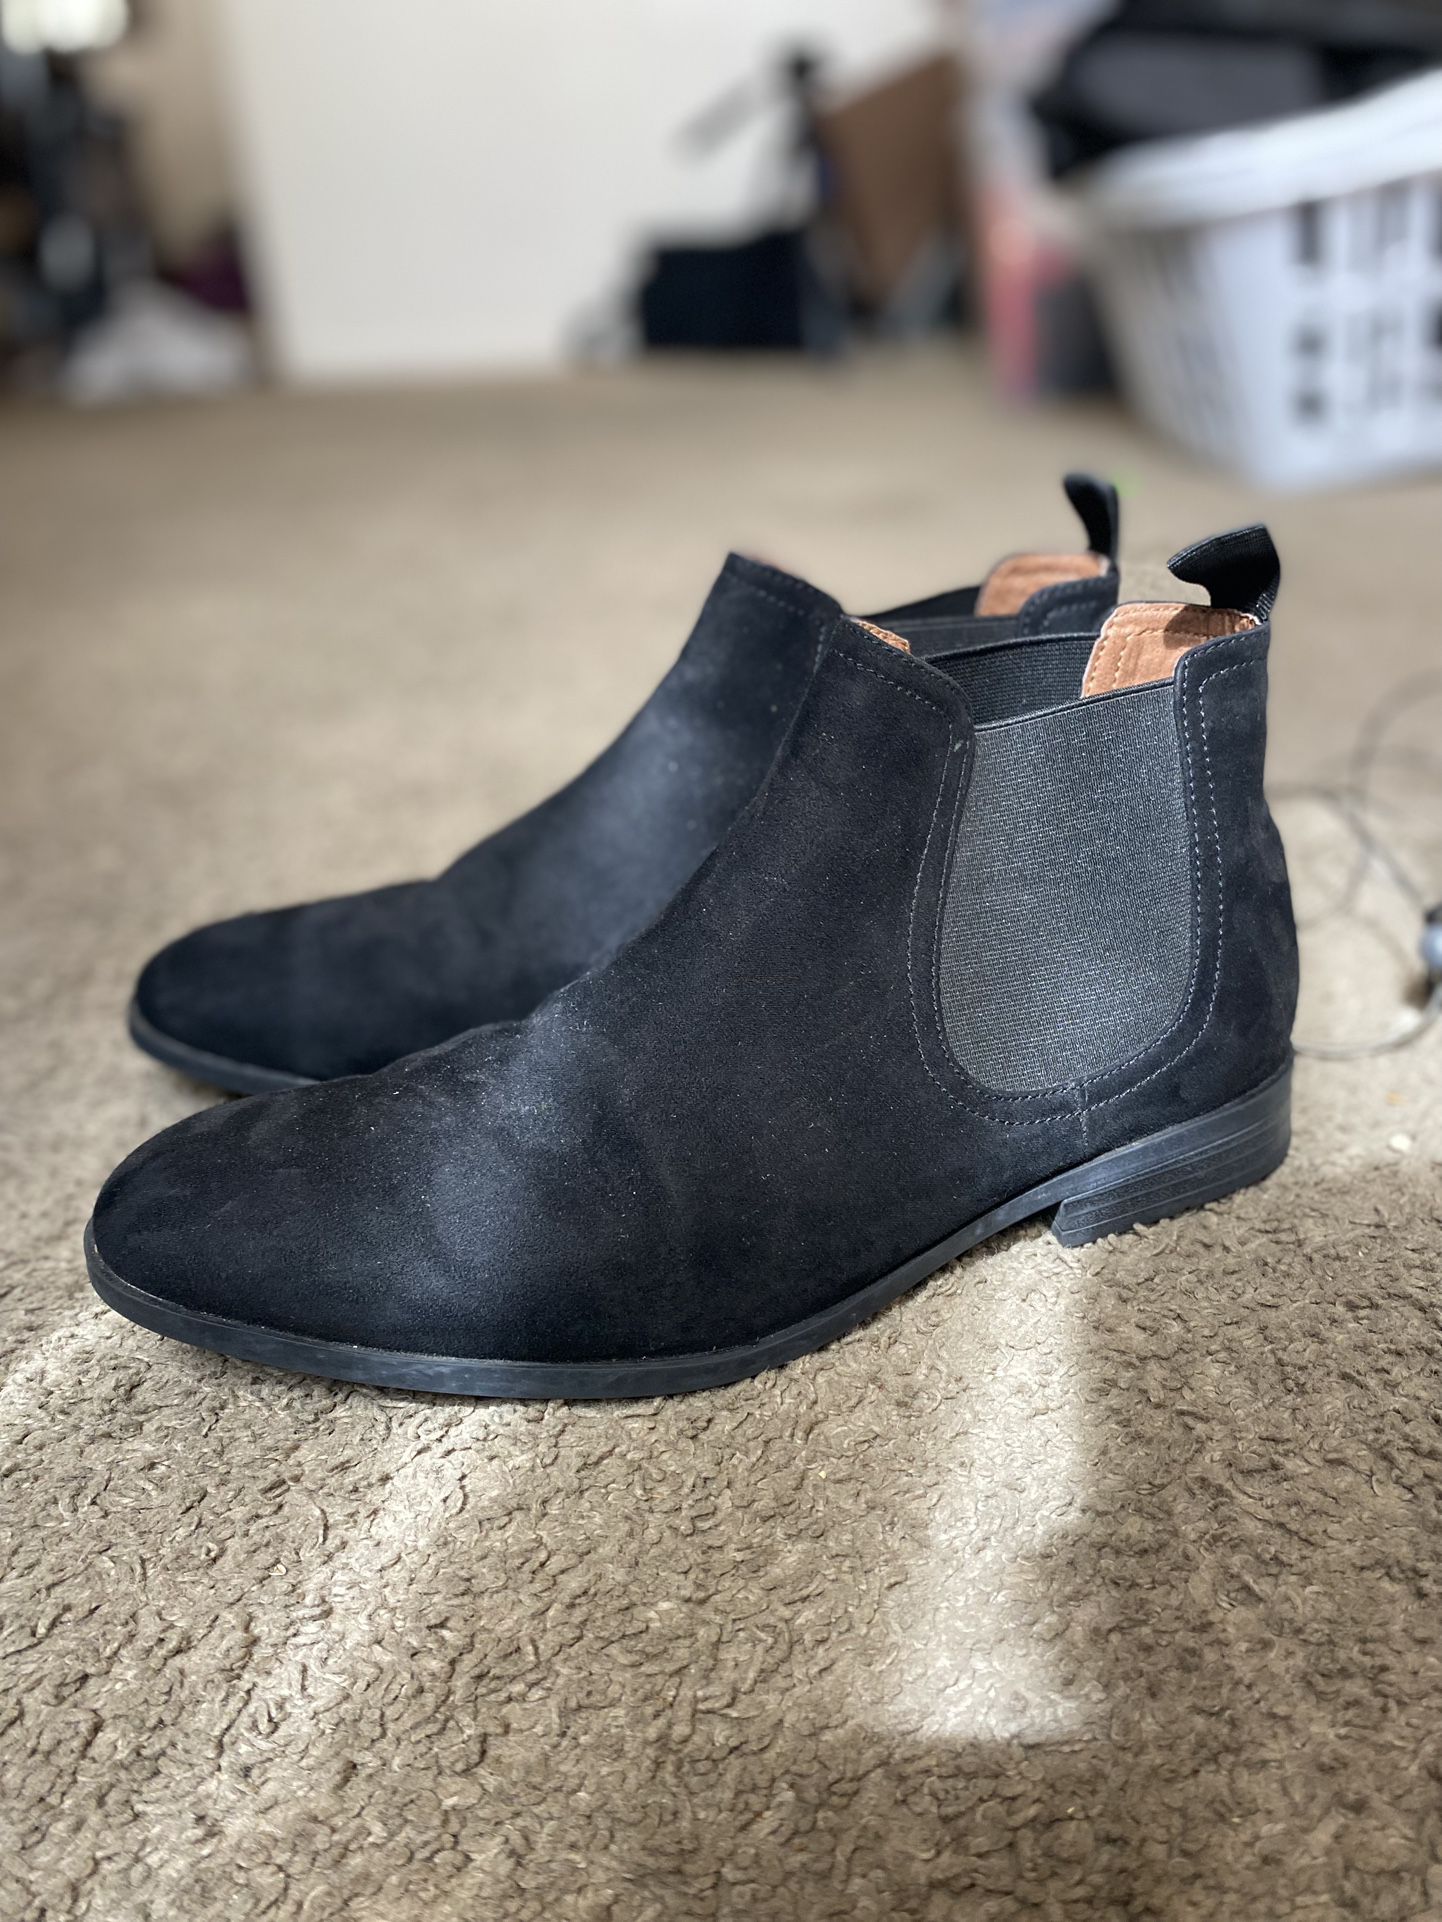 Chelsea Boots H&M Men's for Sale in CA